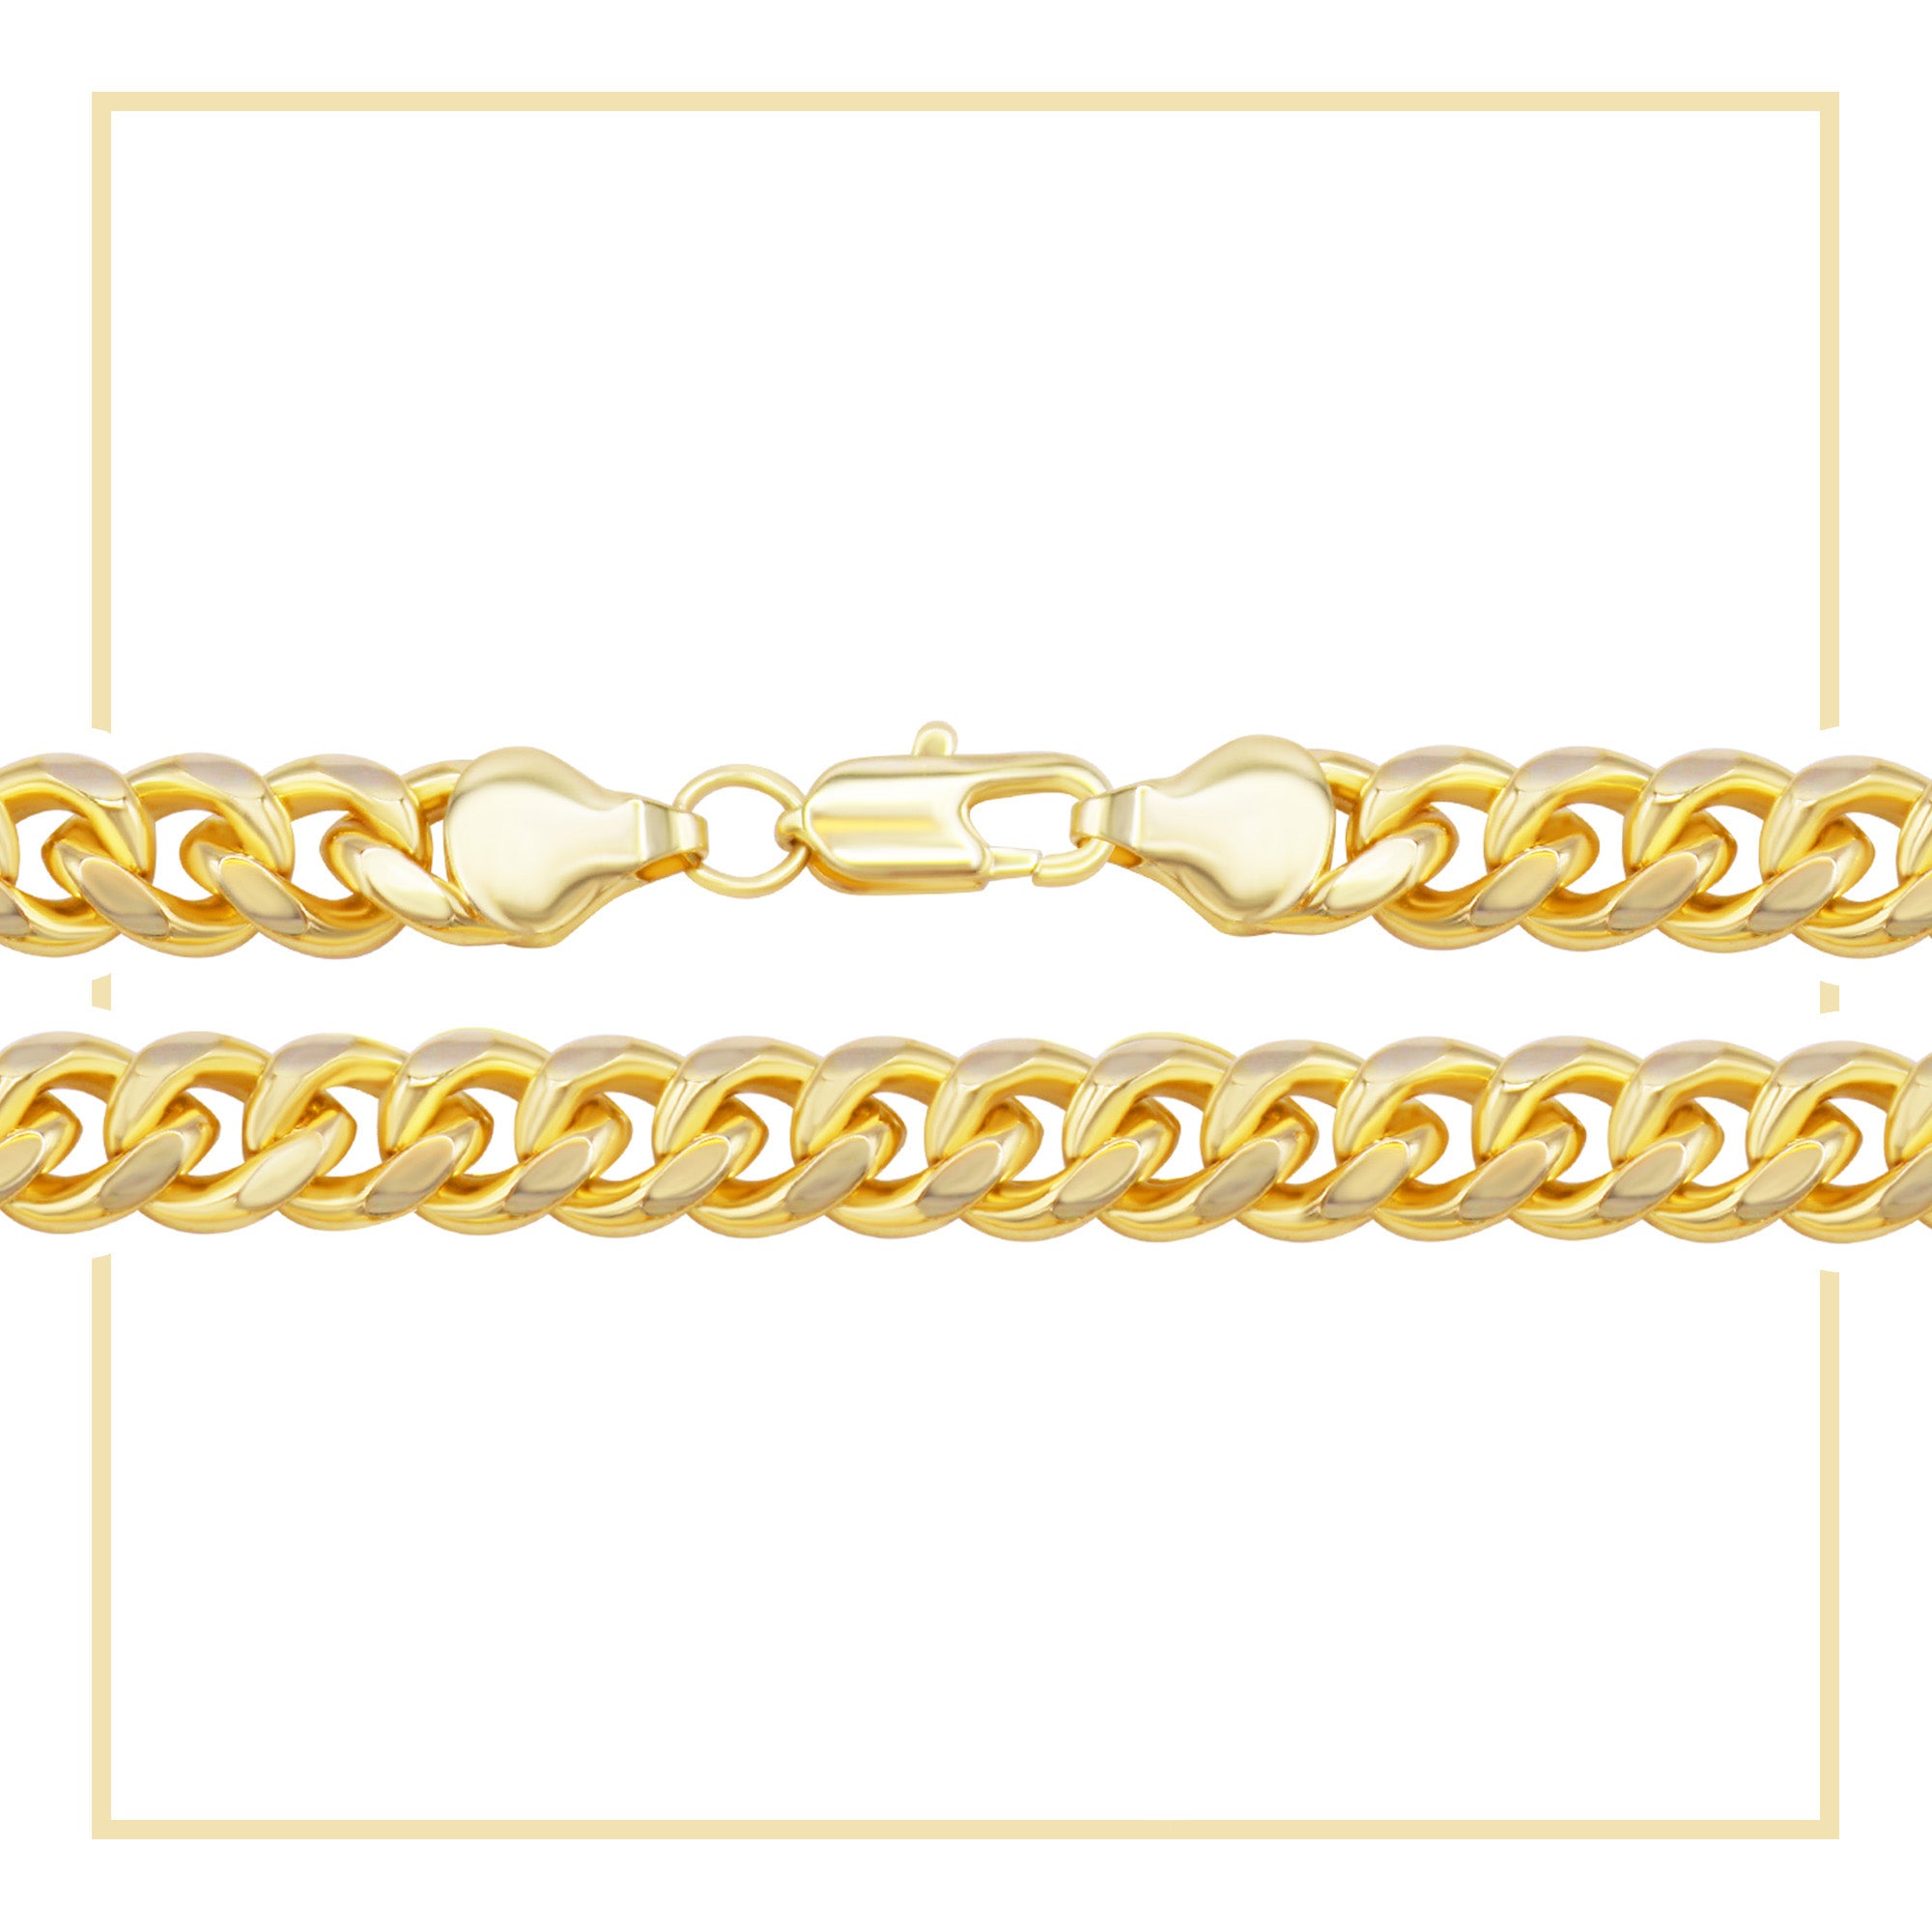 Cuban Link Chain 14K Gold Filled Bracelet 8.5" Lobster Claw Clasp Men Jewelry 6 mm 8 mm